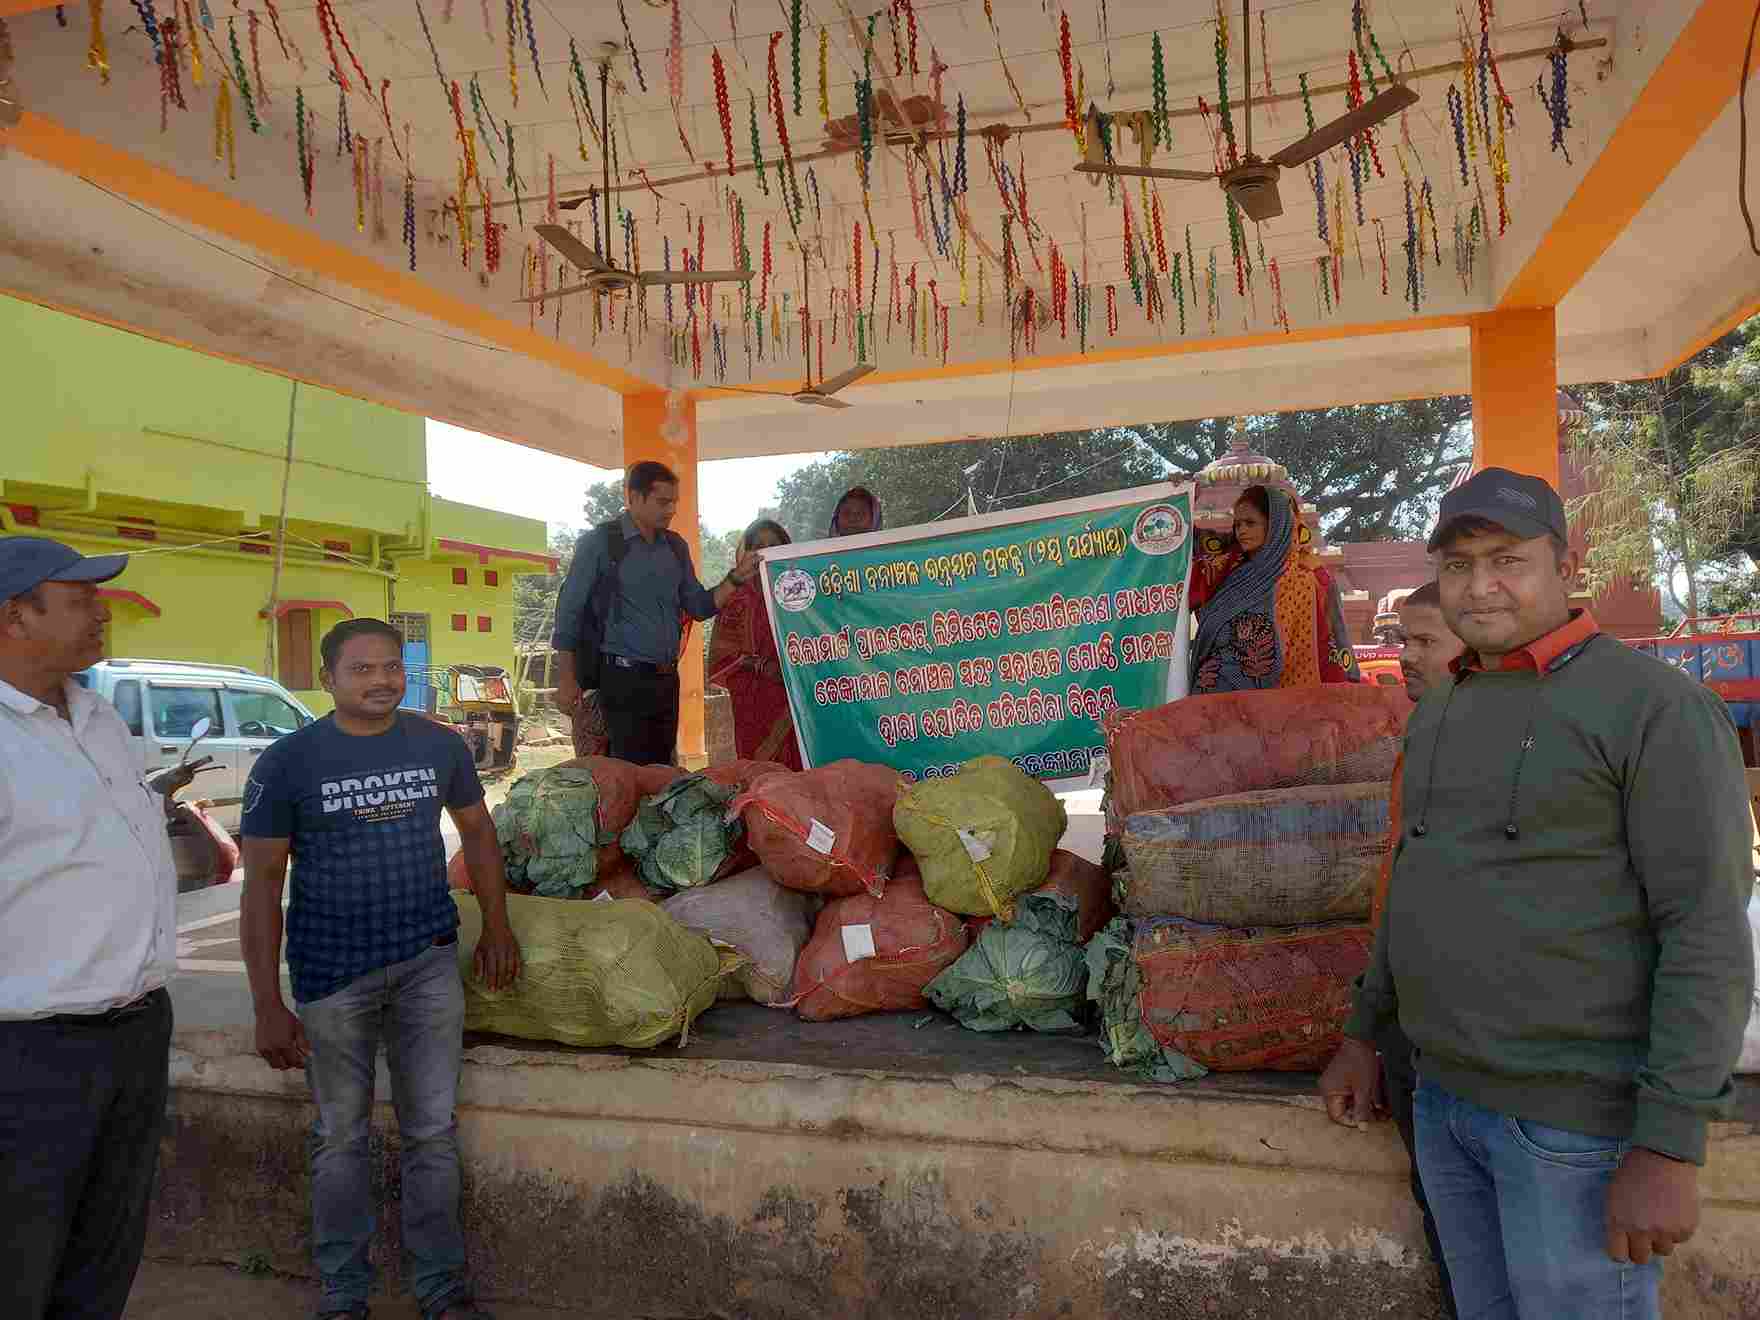 Through Villa Mart, farmers can get good prices for their produce